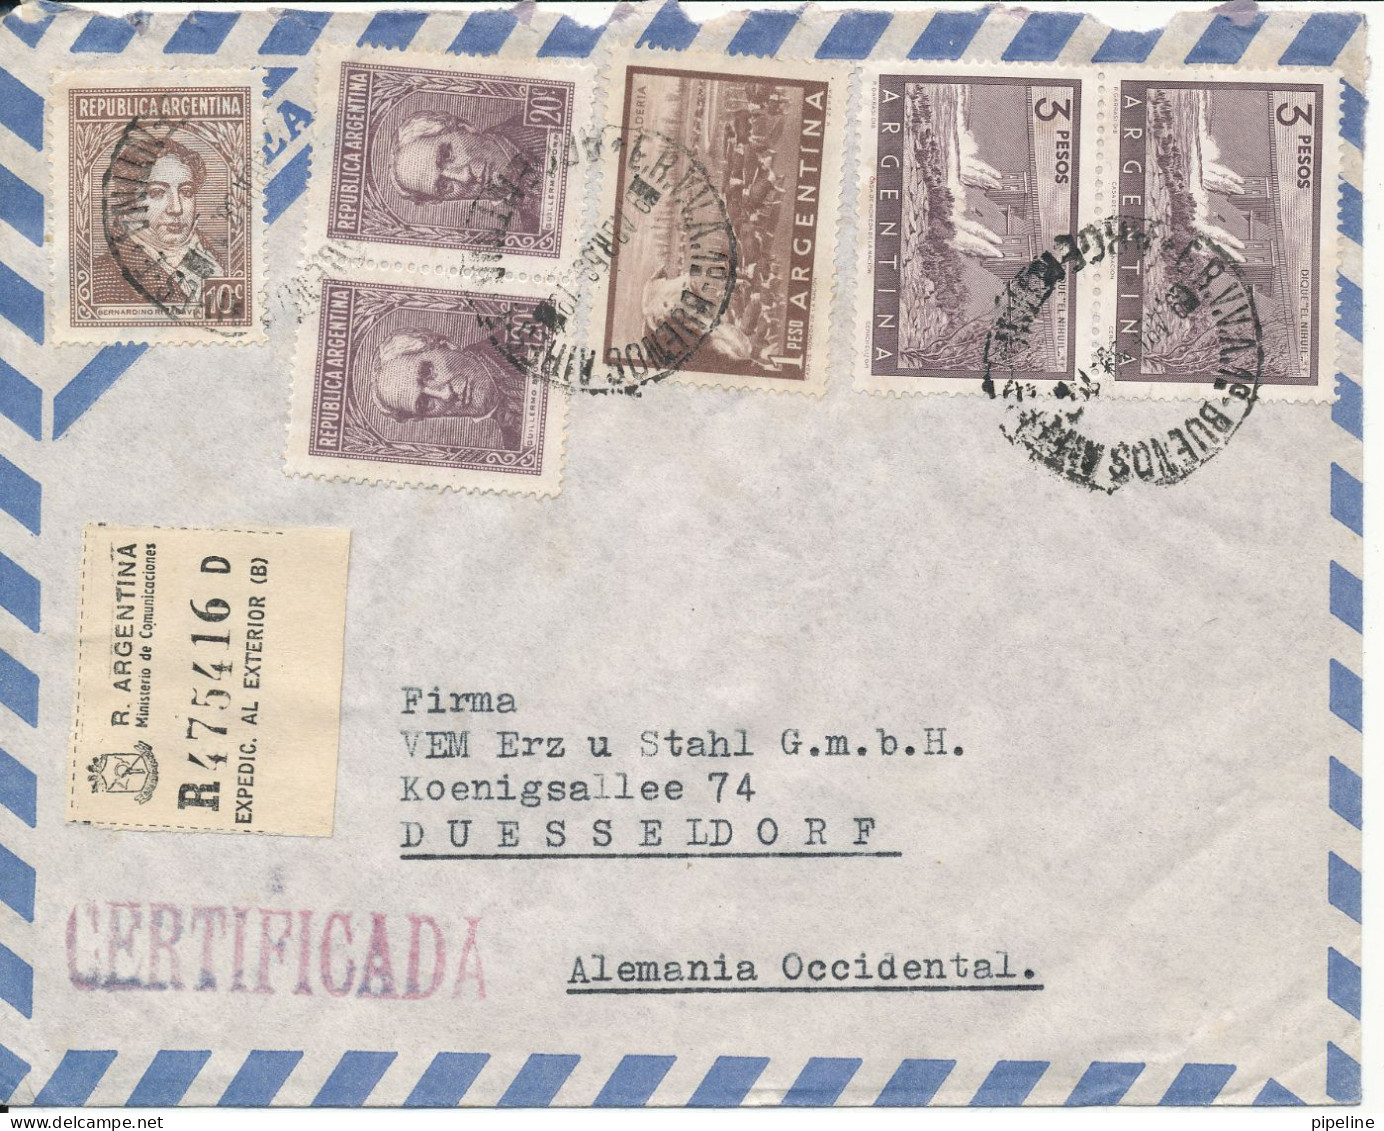 Argentina Registered Air Mail Cover Sent To Germany 9-4-1956 With More Stamps - Aéreo